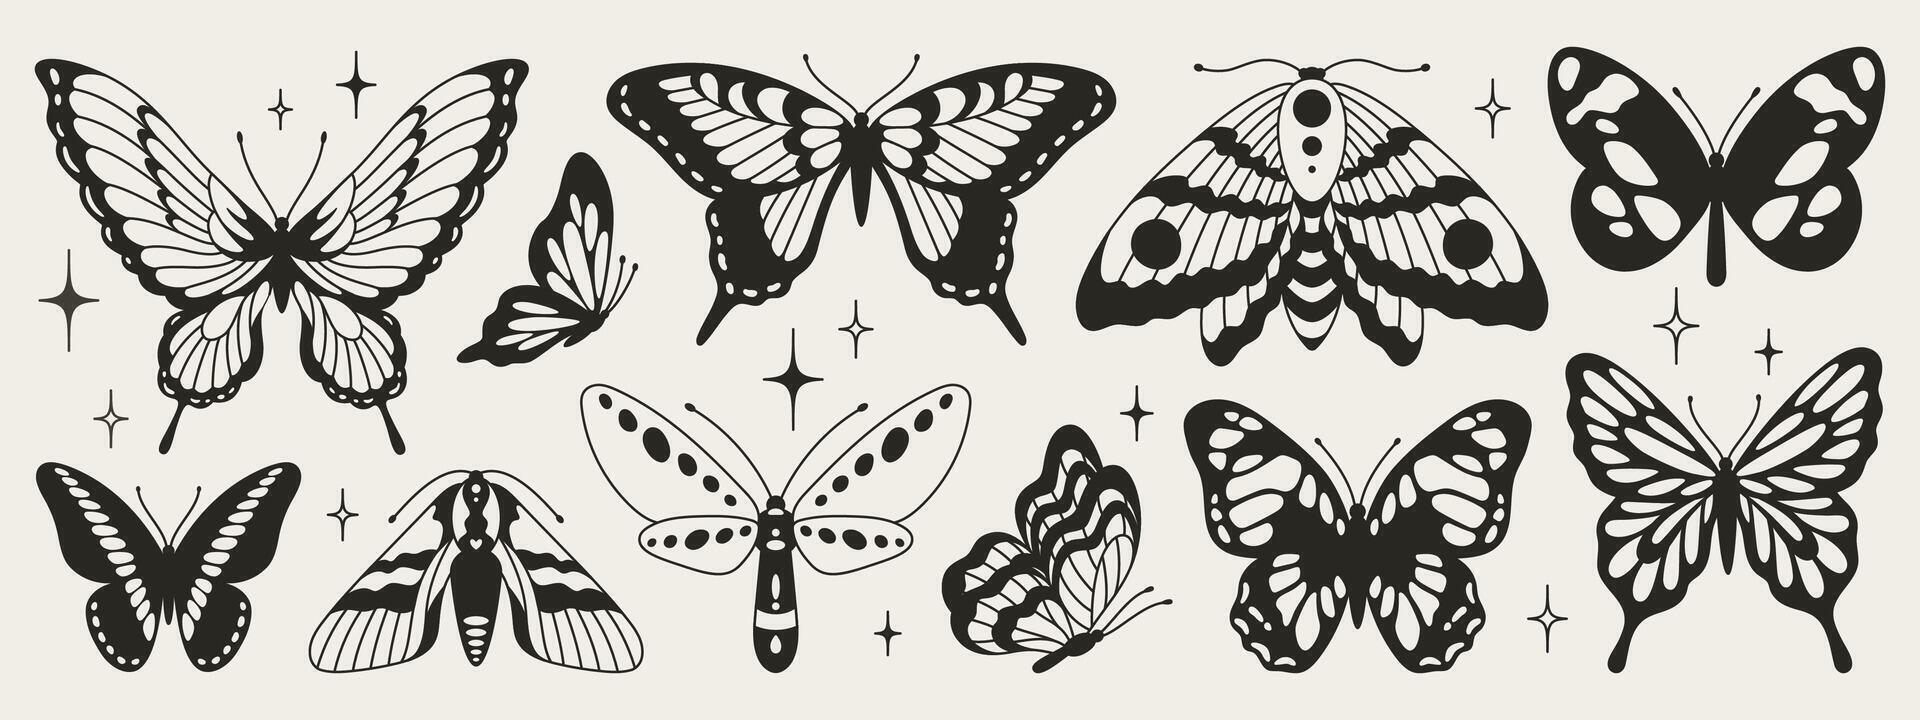 Butterfly seventh set of black and white wings in the style of wavy lines and organic shapes. Y2k aesthetic, tattoo silhouette, hand drawn stickers. Vector graphic in trendy retro 2000s style